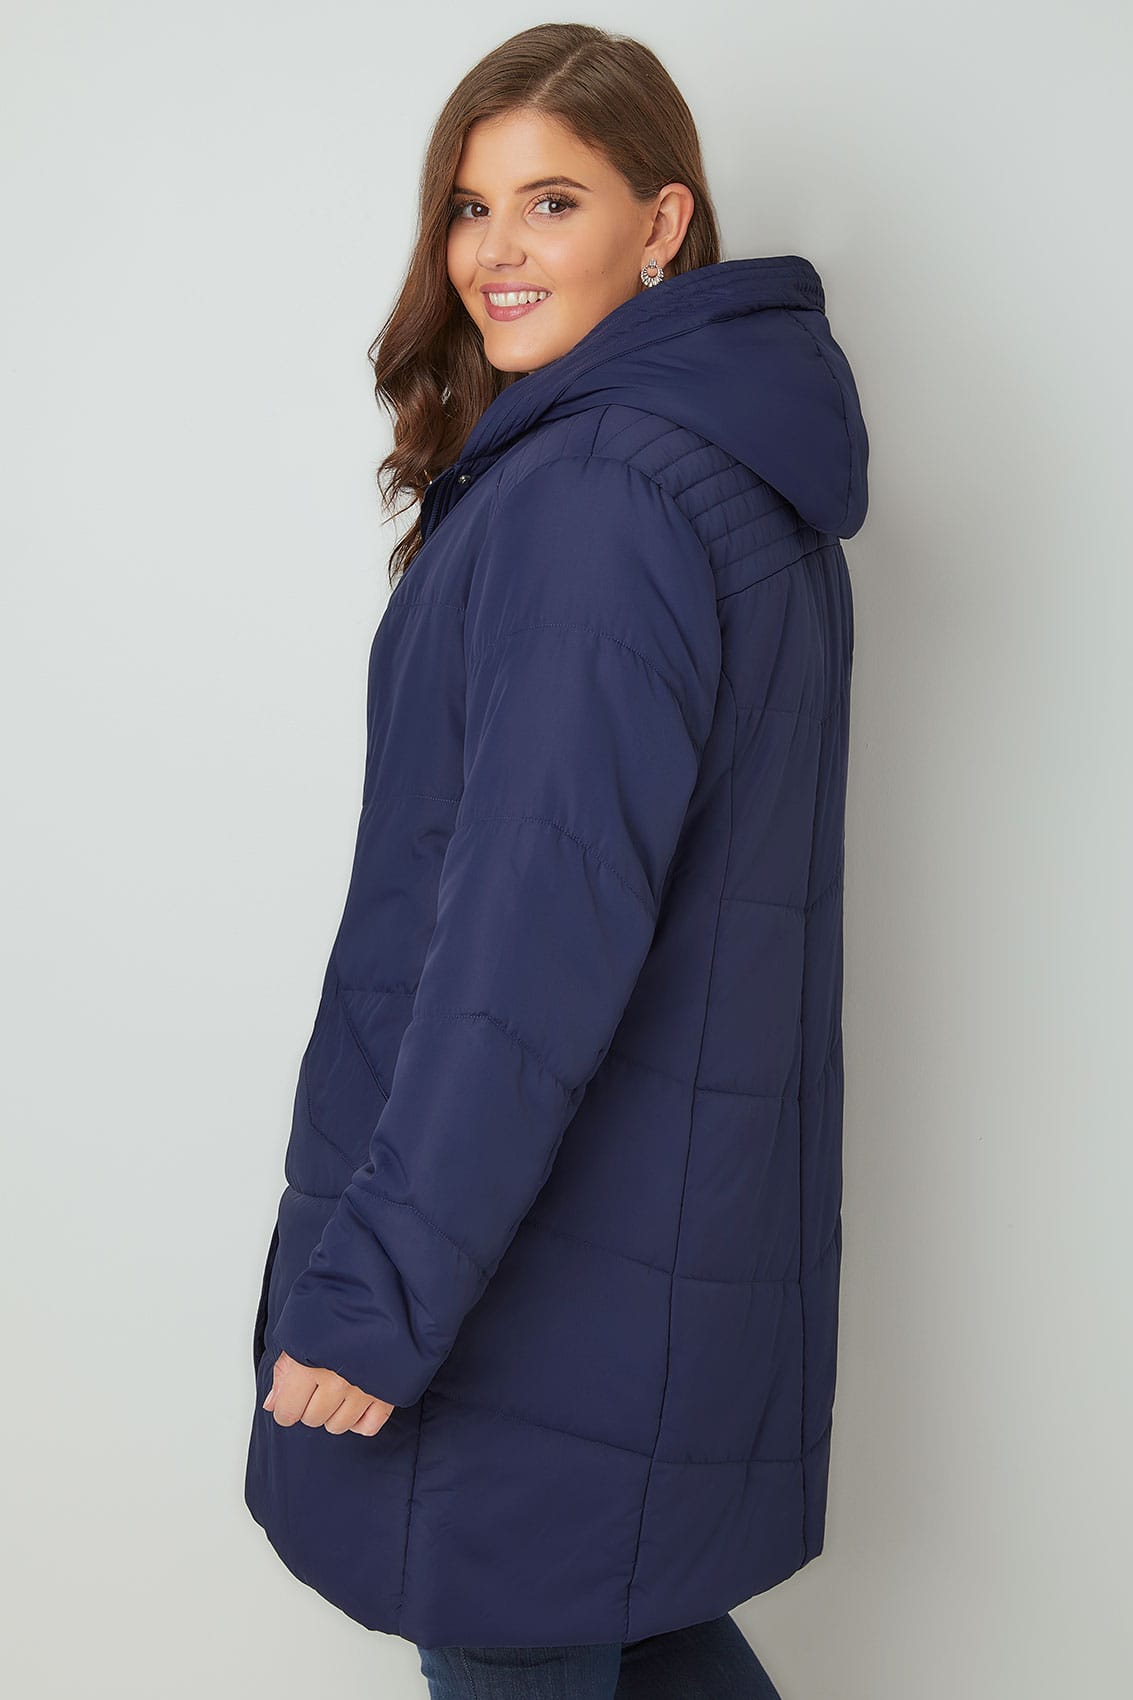 Navy Padded Puffer Jacket With Hood, Plus size 16 to 36